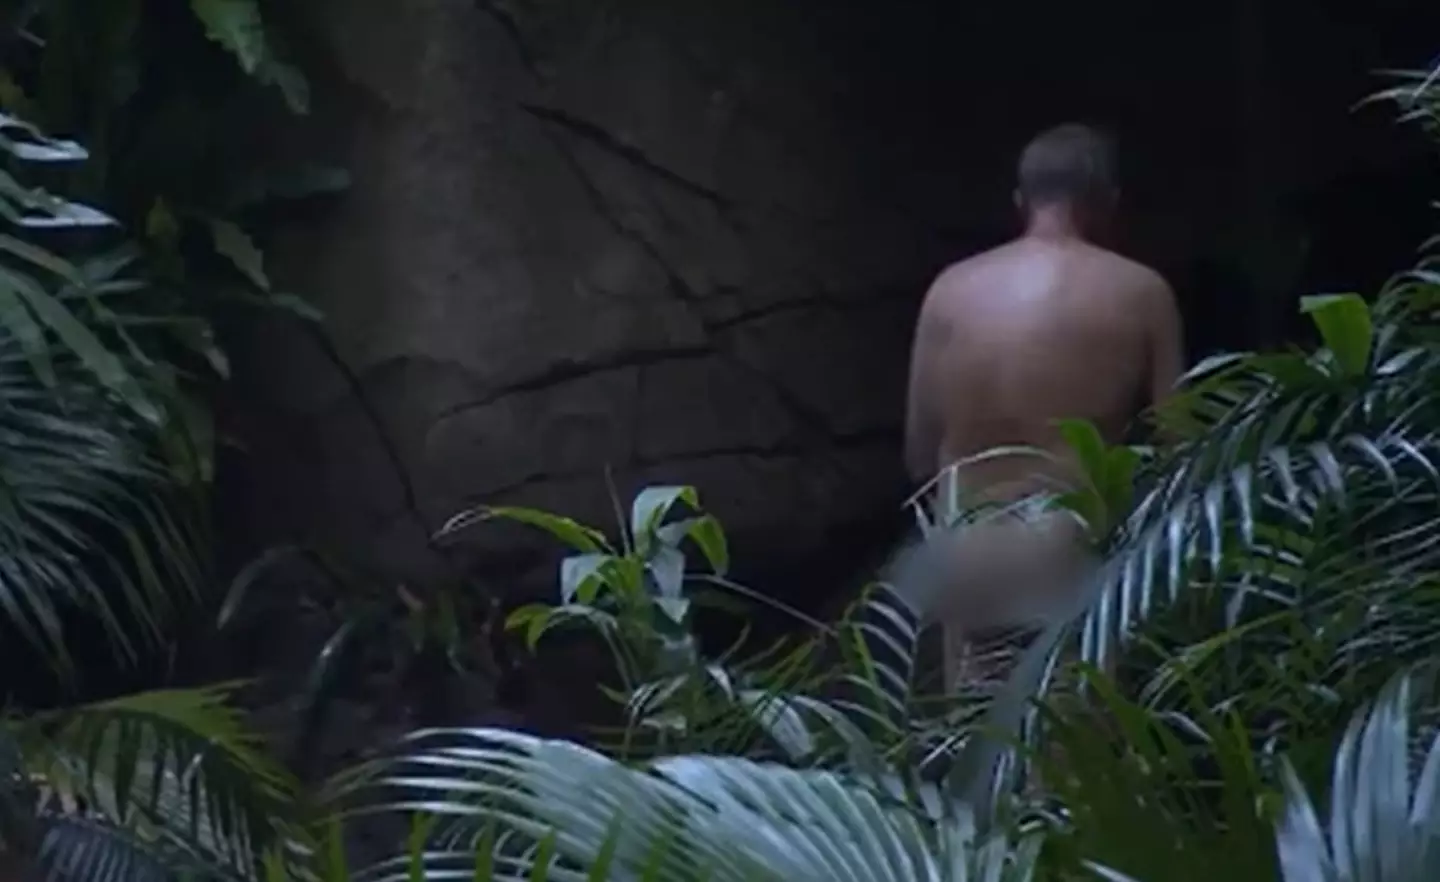 ITV have been criticised for giving Nigel Farage exposure by having him on I'm A Celeb.